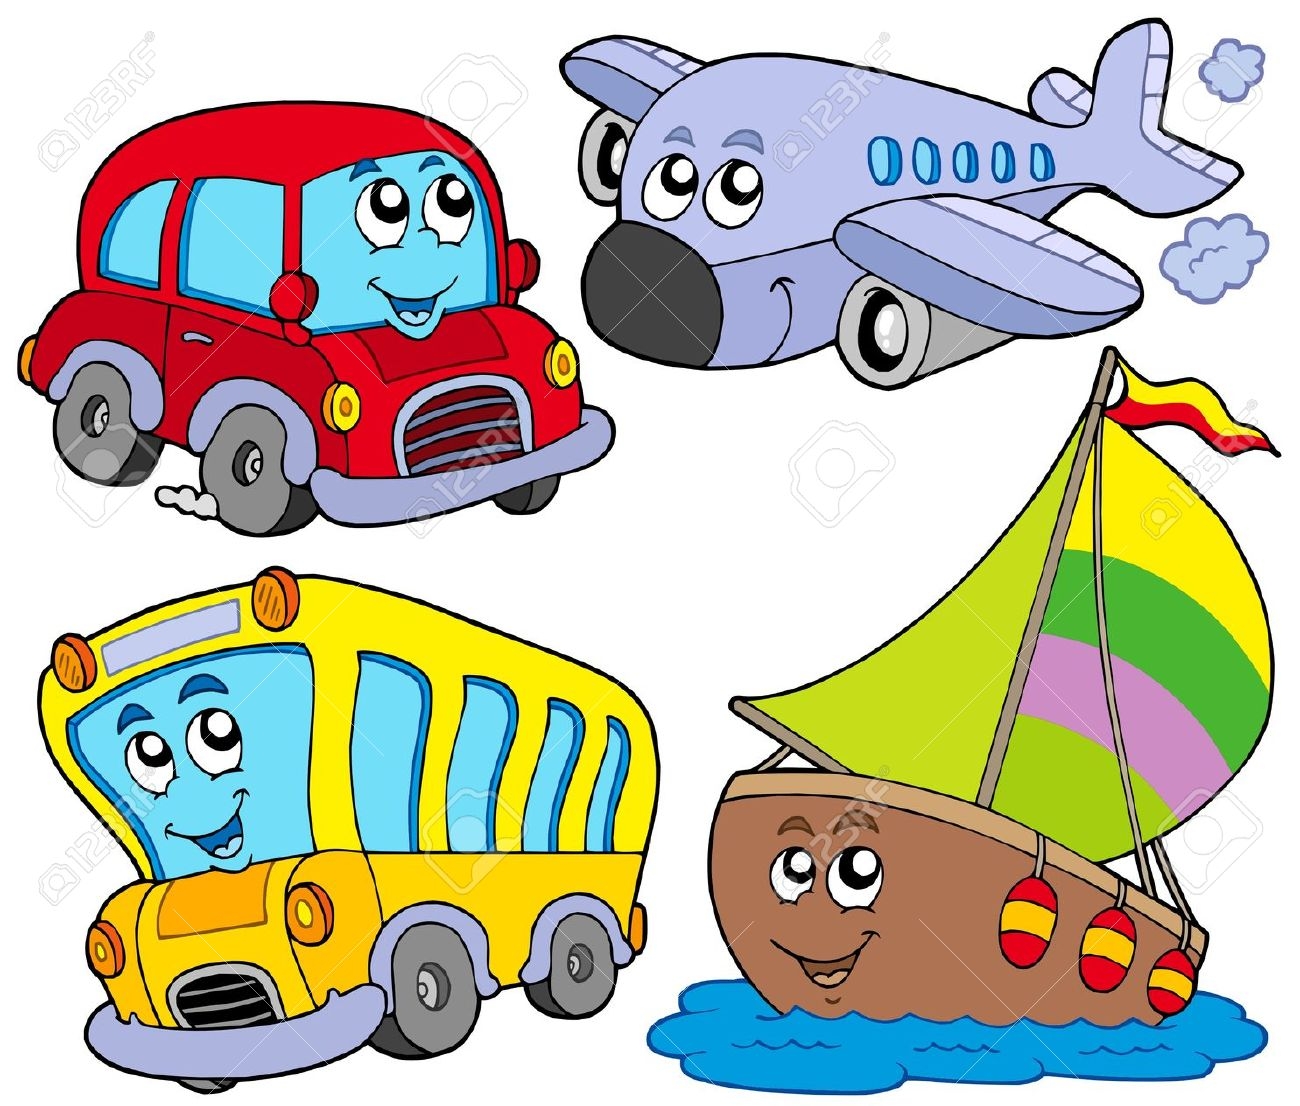 means-of-transportation-clipart-free-download-on-clipartmag